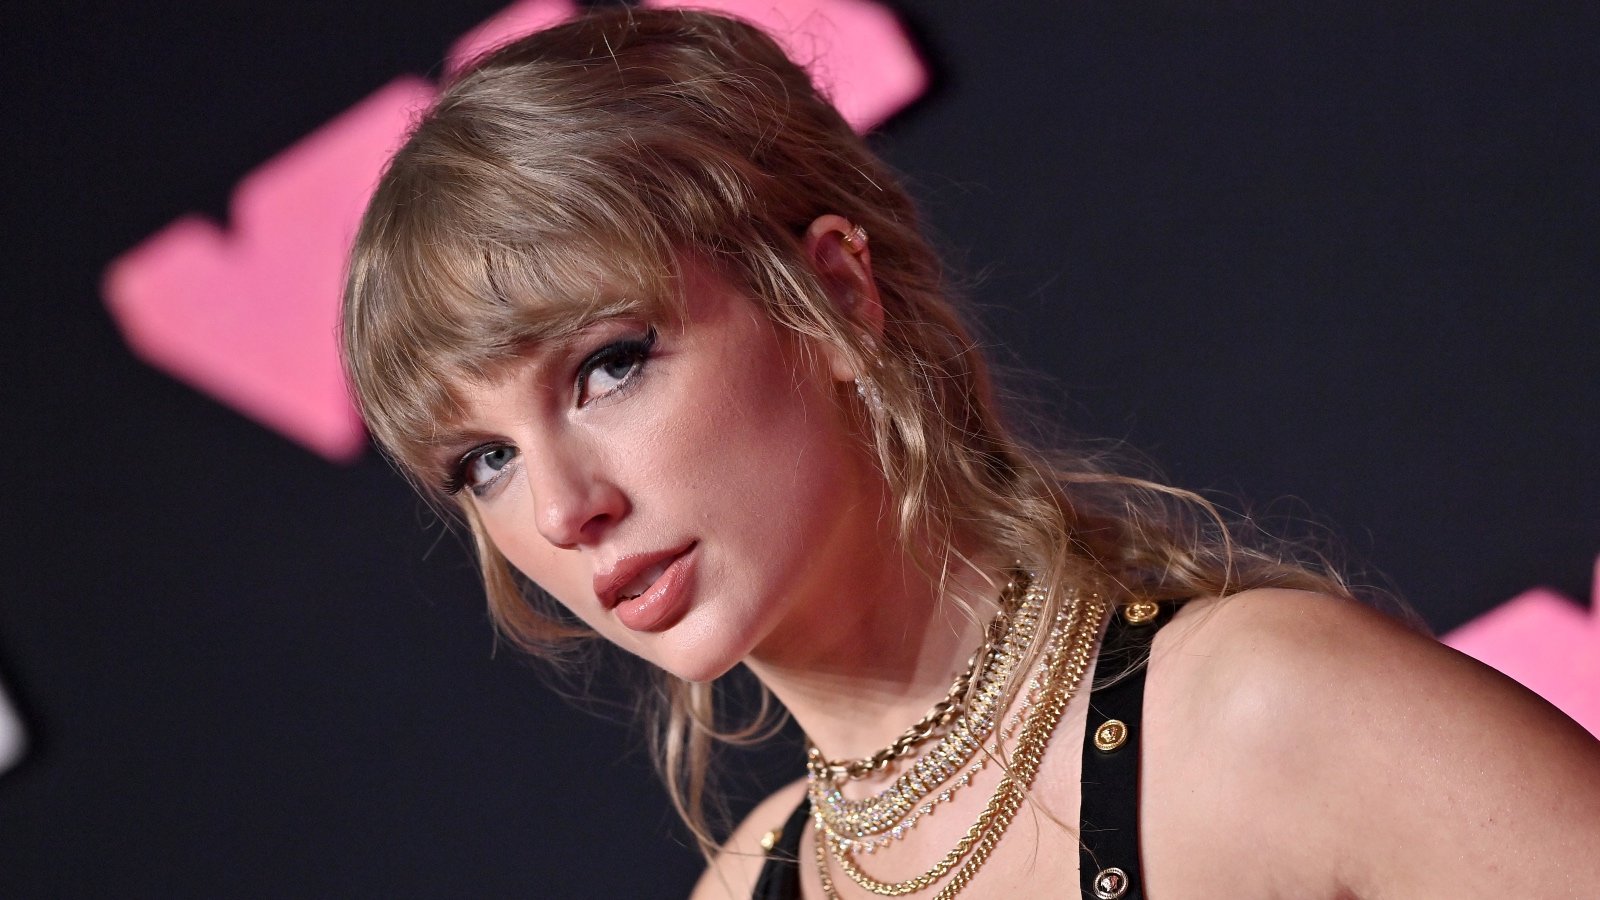 'Taylor Swift' Rockets To #1 Most Searched Term In The World After Google Launches 'Vault' Easter Eggs